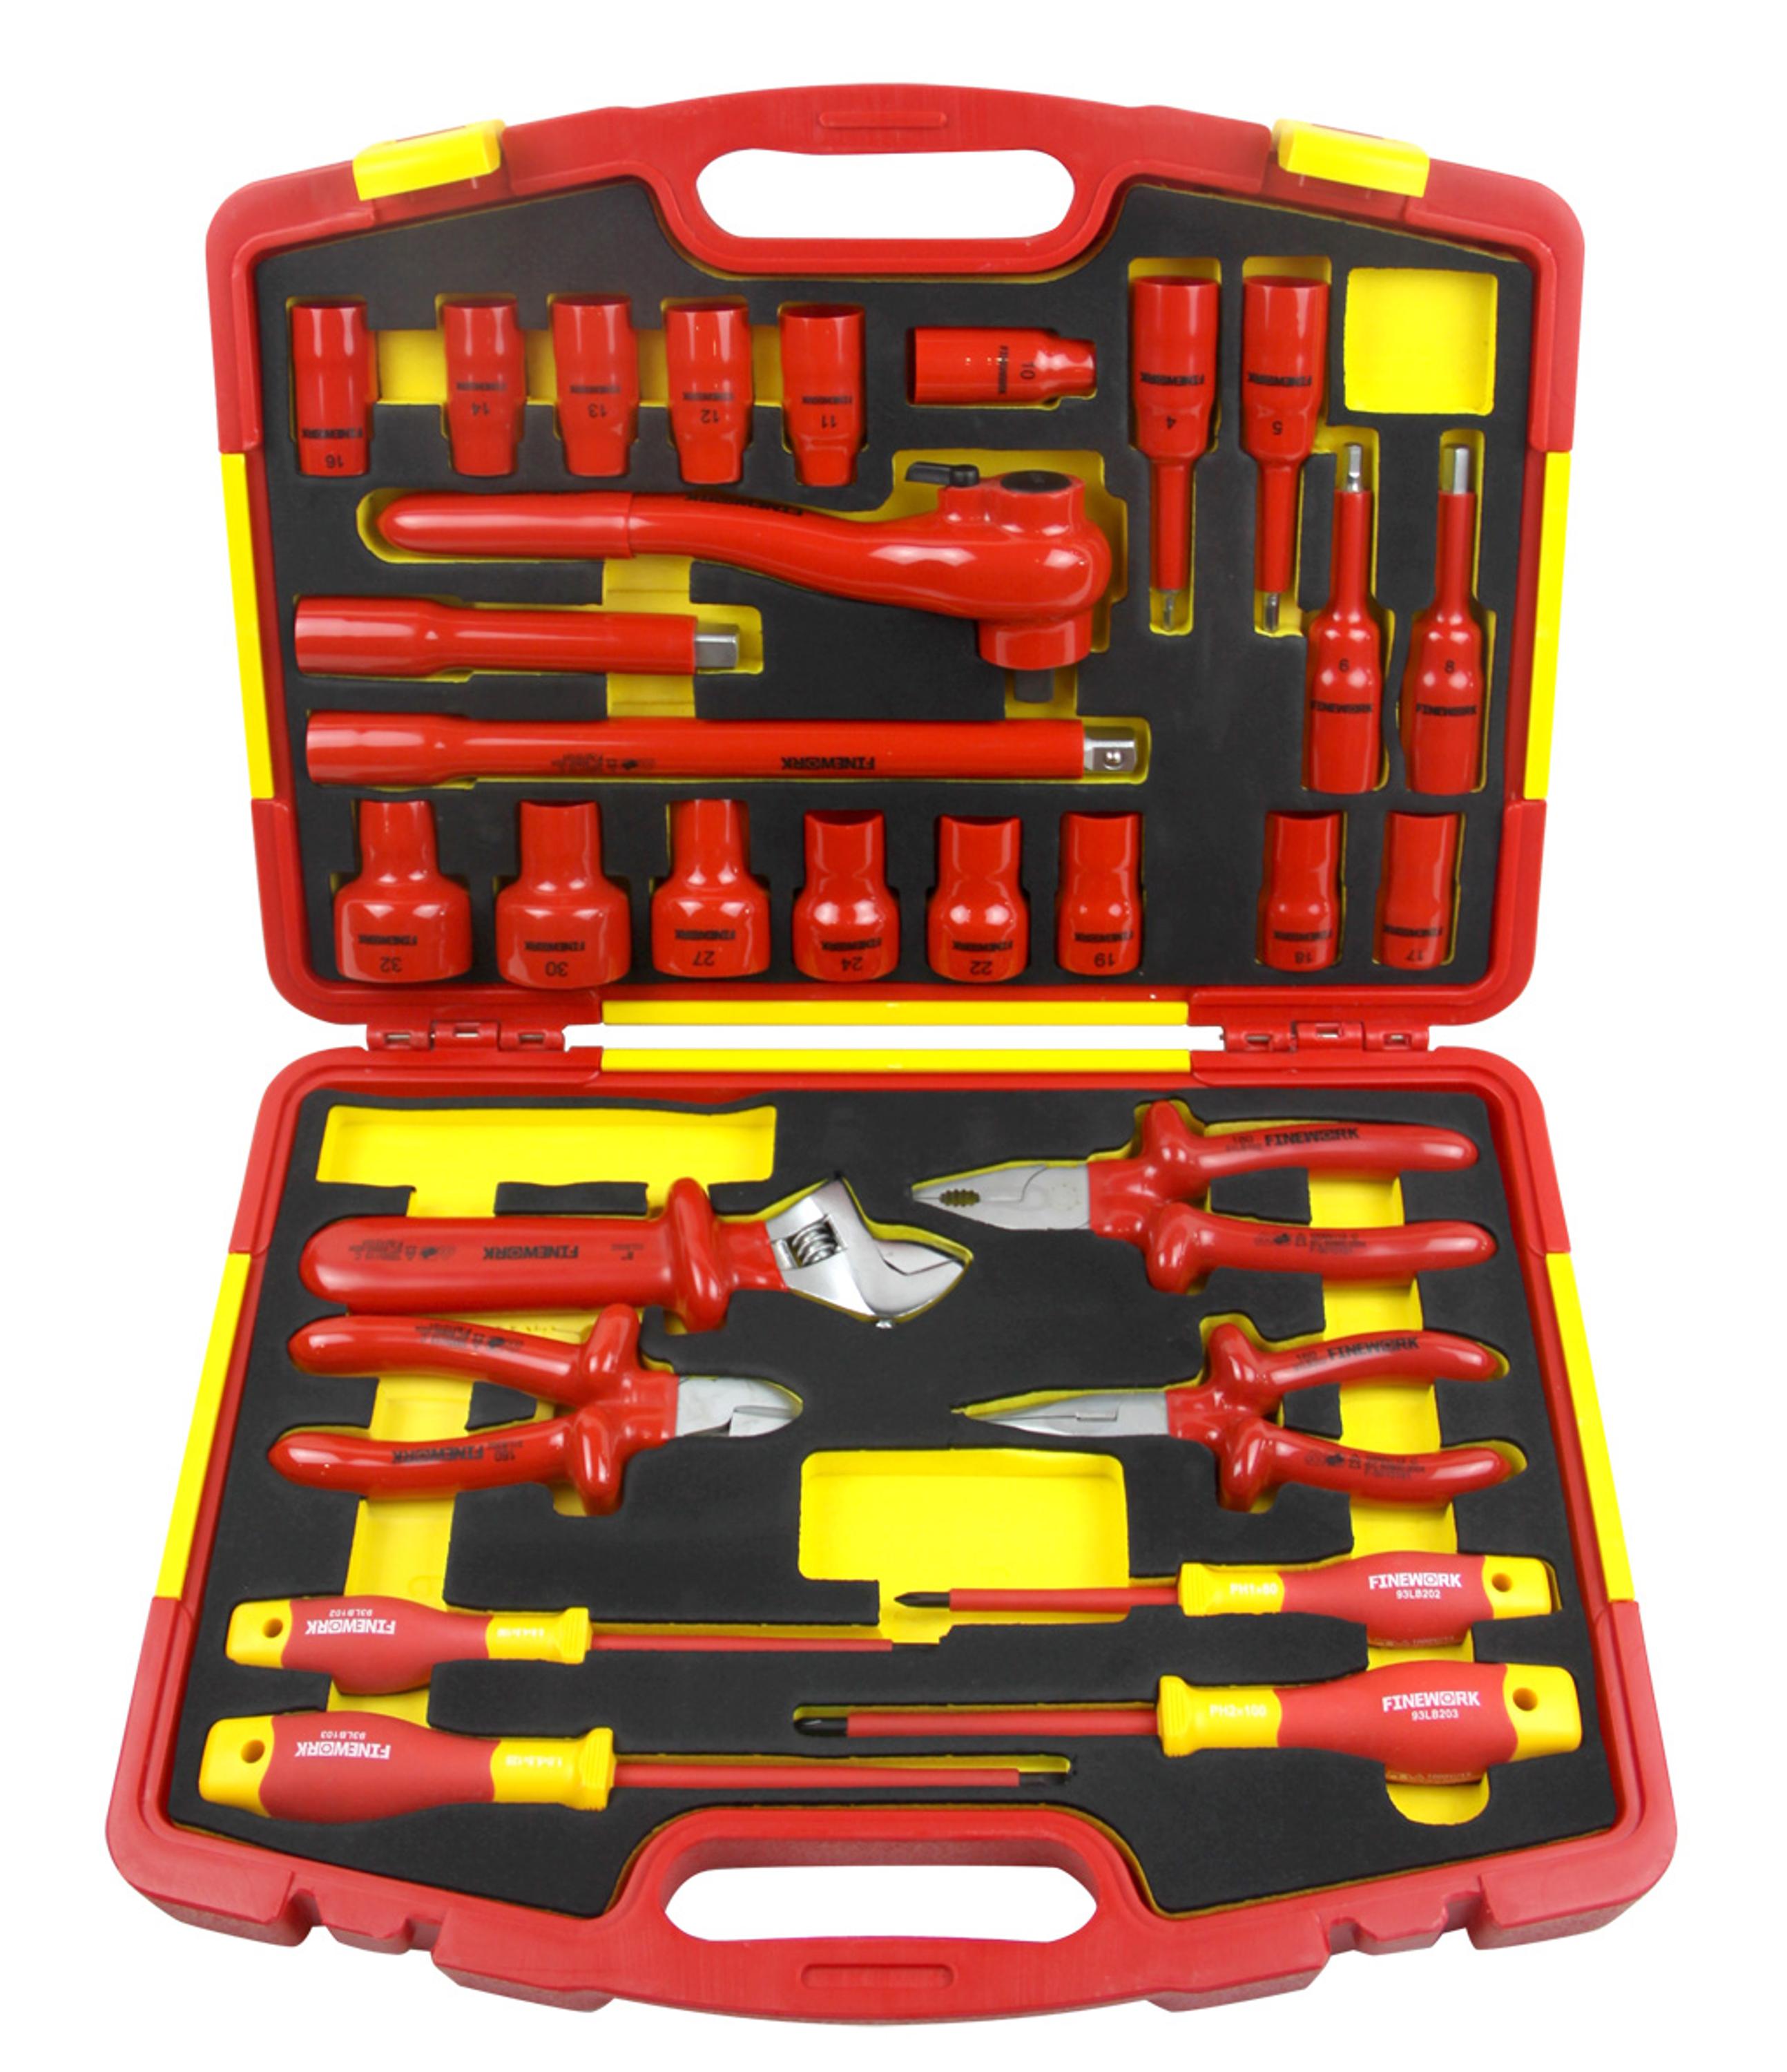 29 Pcs Insulated Pliers, Insulated Screwdriver, Insulated Socket Insulated Adjustable Wrench in Insulated Tool Set